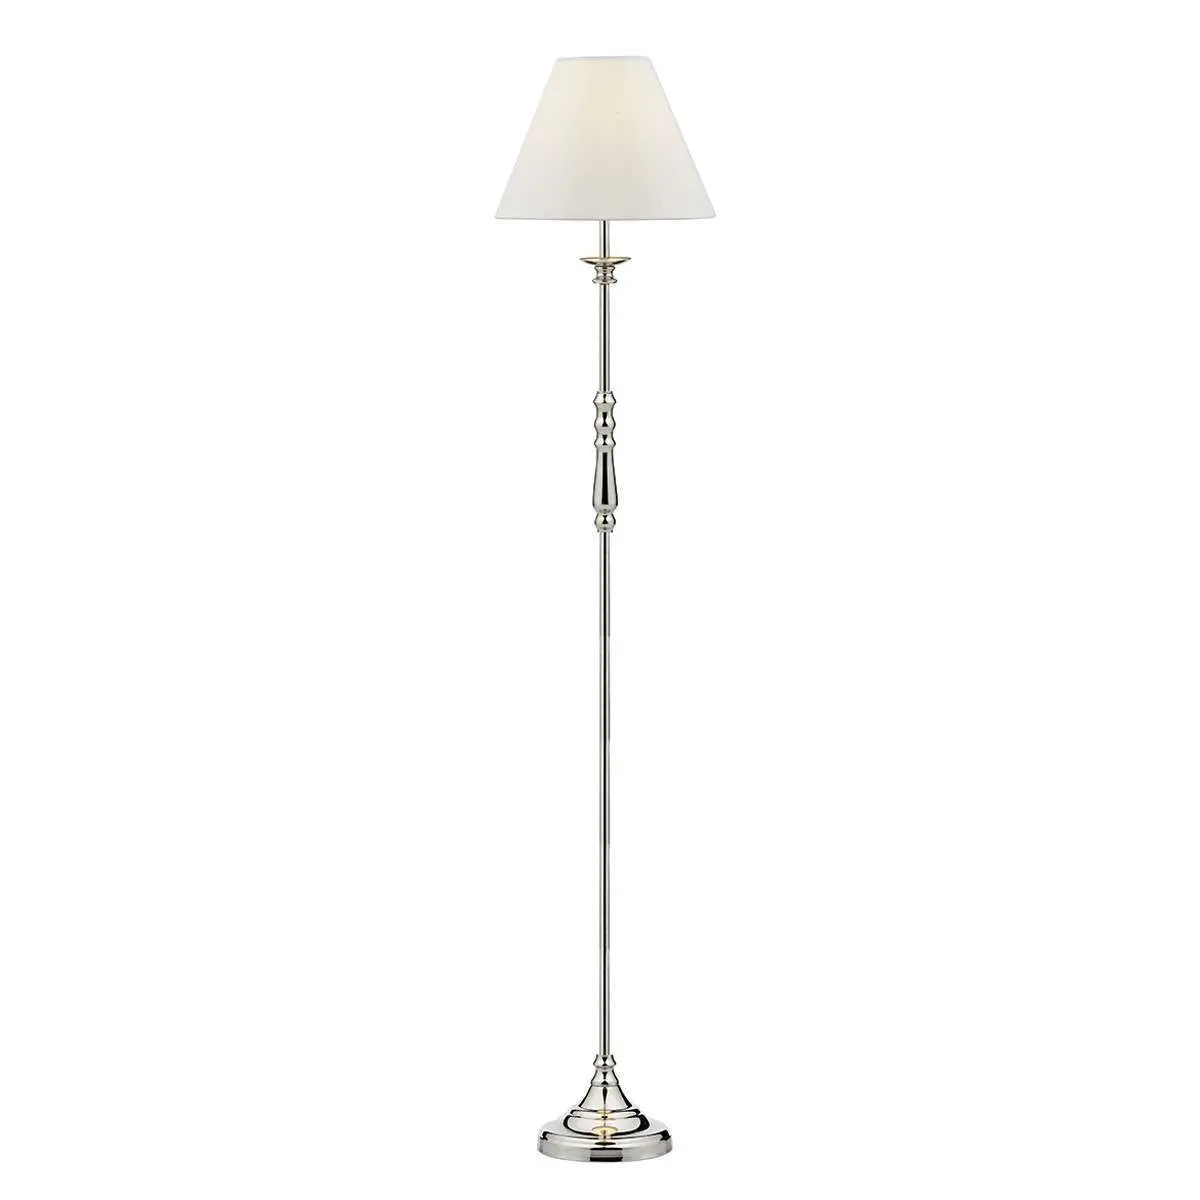 Blenheim Floor Lamp Polished Nickel complete with BLE1215 Ivory Shade